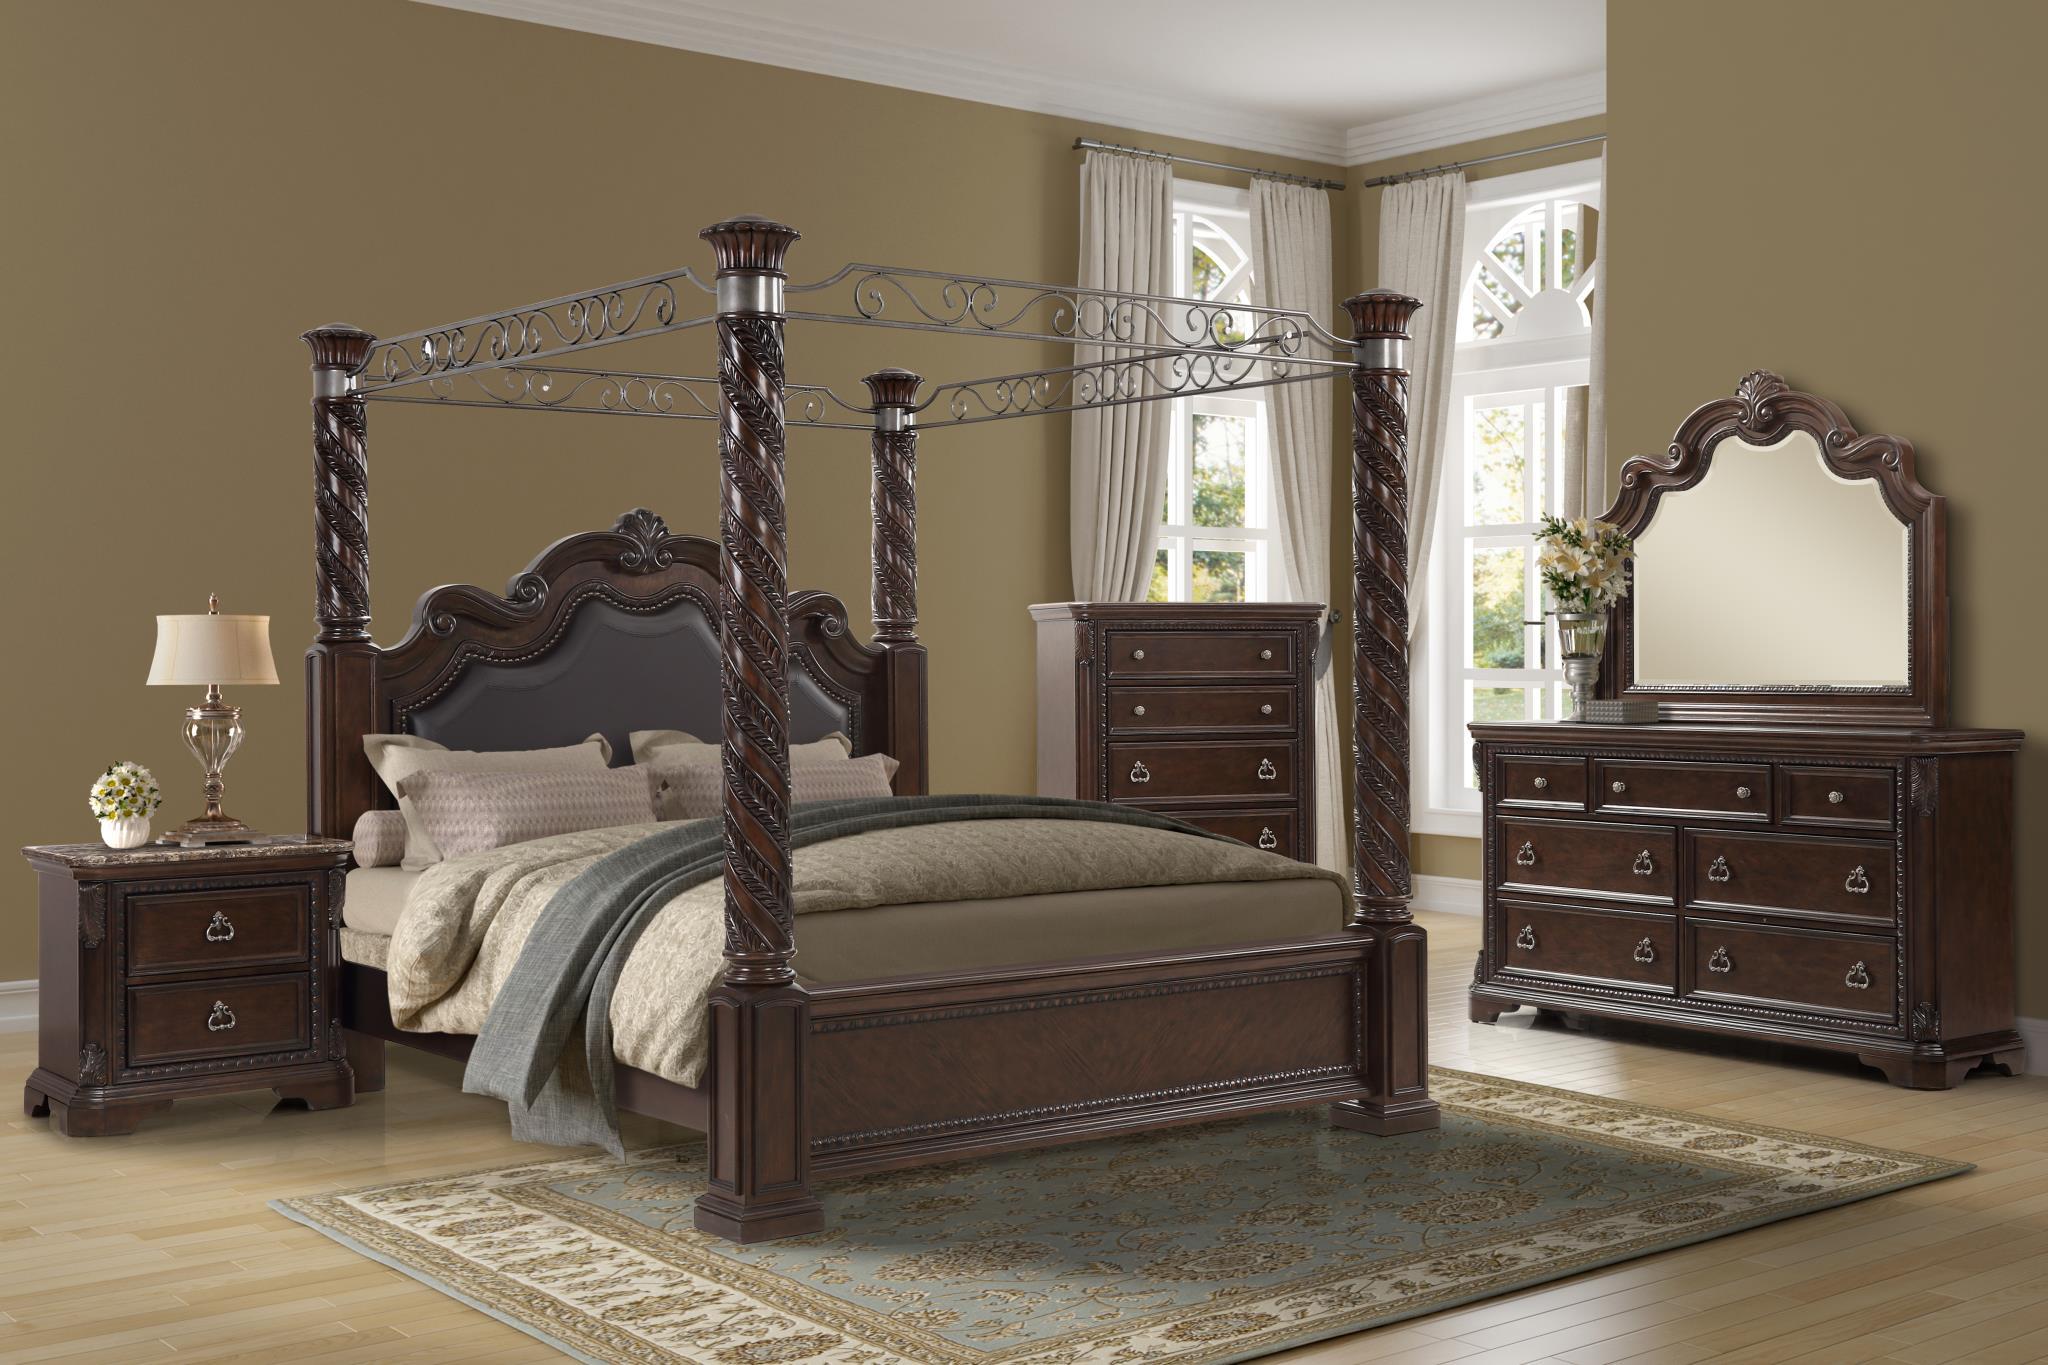 Modern, Transitional Canopy Bedroom Set COVENTRY 1988-113-Set-3 1988-113-2N-3PC in Mahogany Bonded Leather